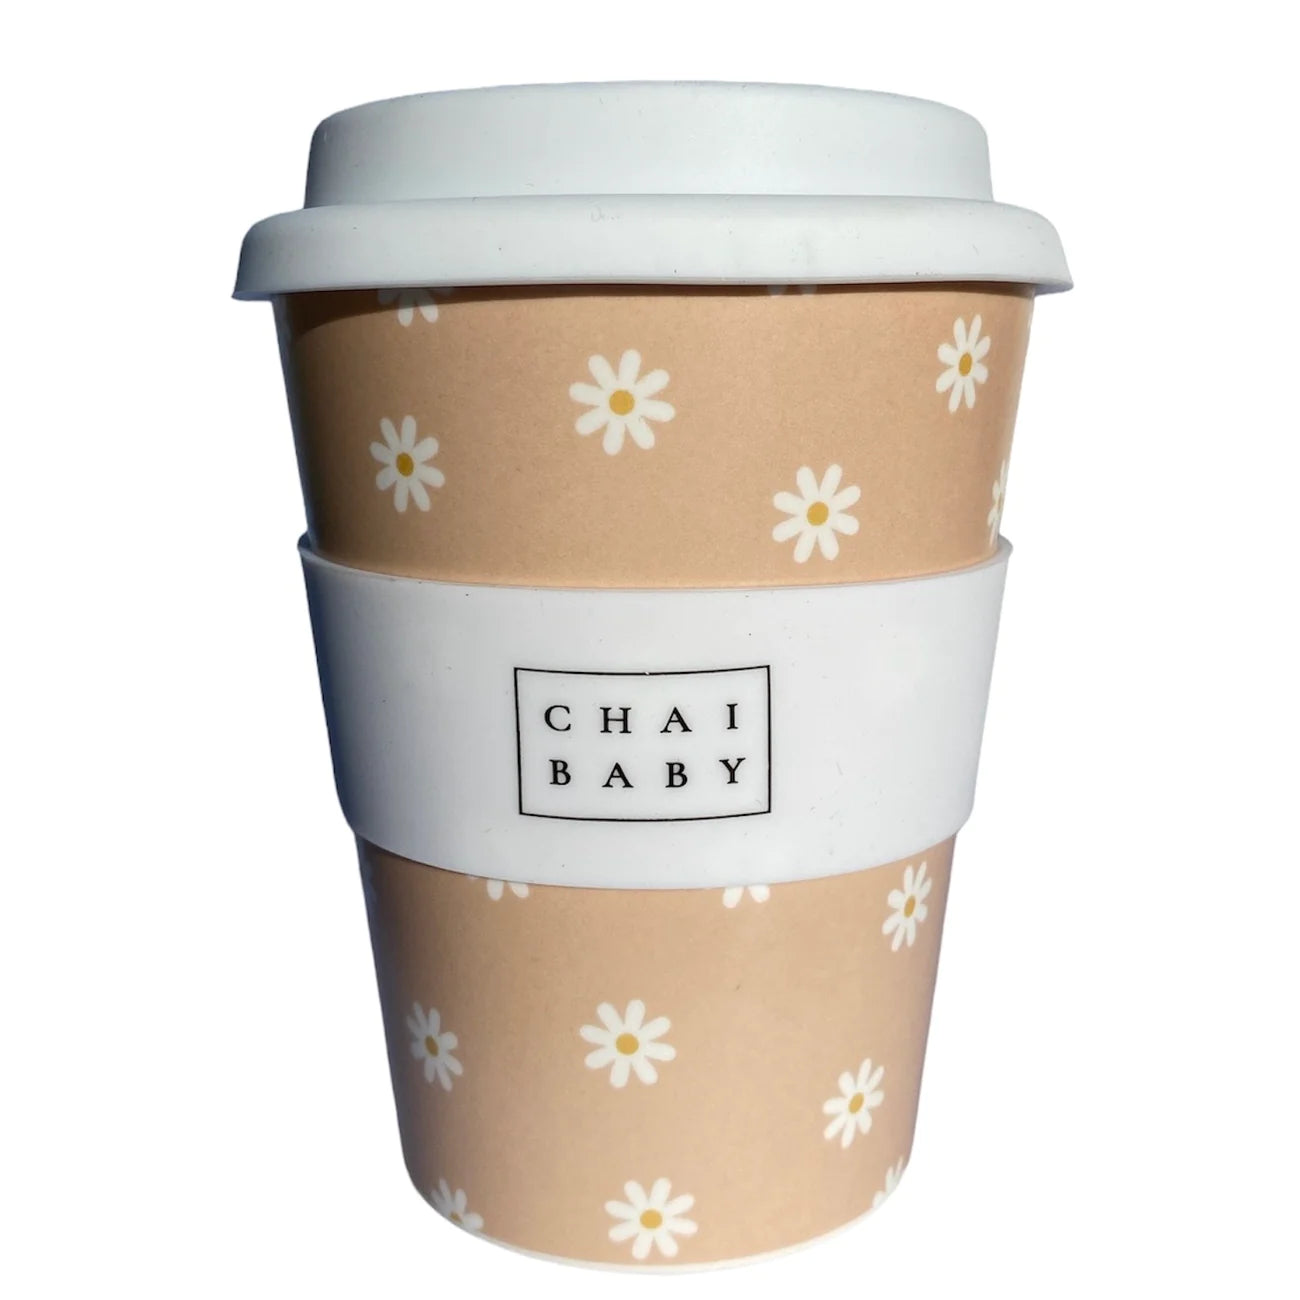 Chai Baby Natural Daisy Adult Cup